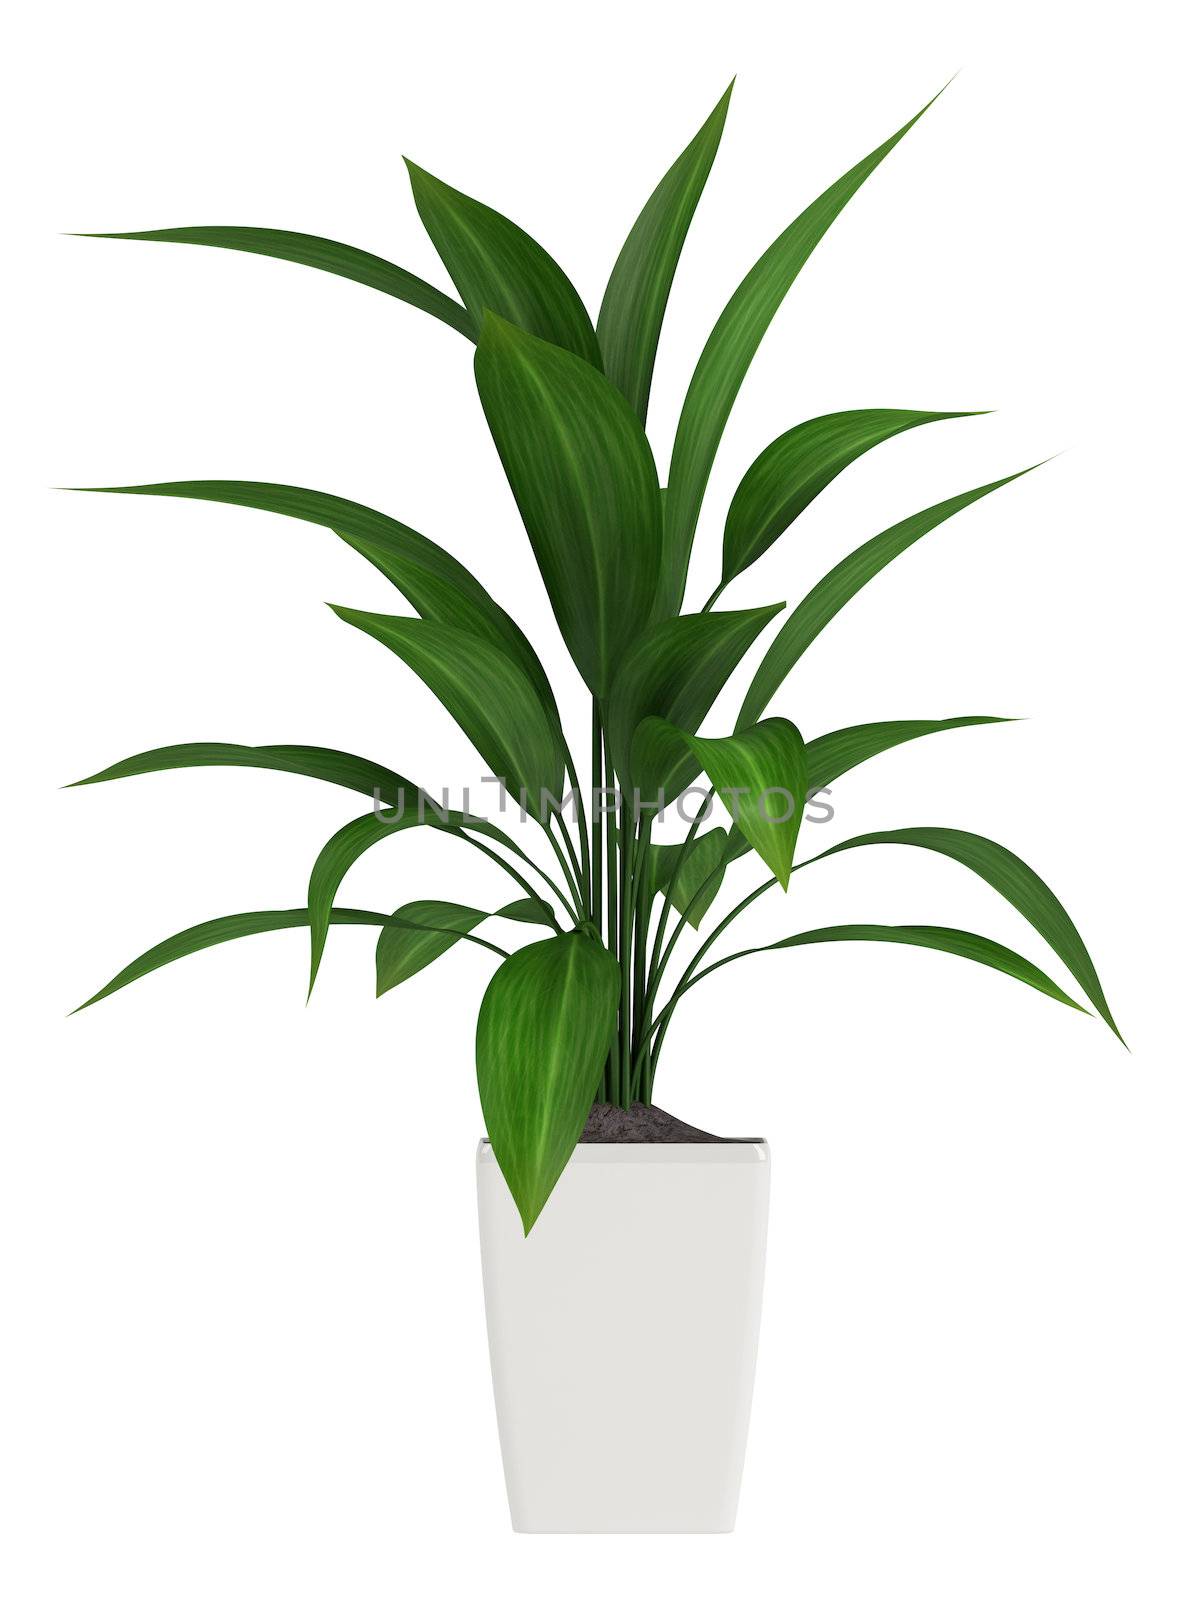 A healthy green leafy aspidistra grown as a common foliage houseplant isolated on white